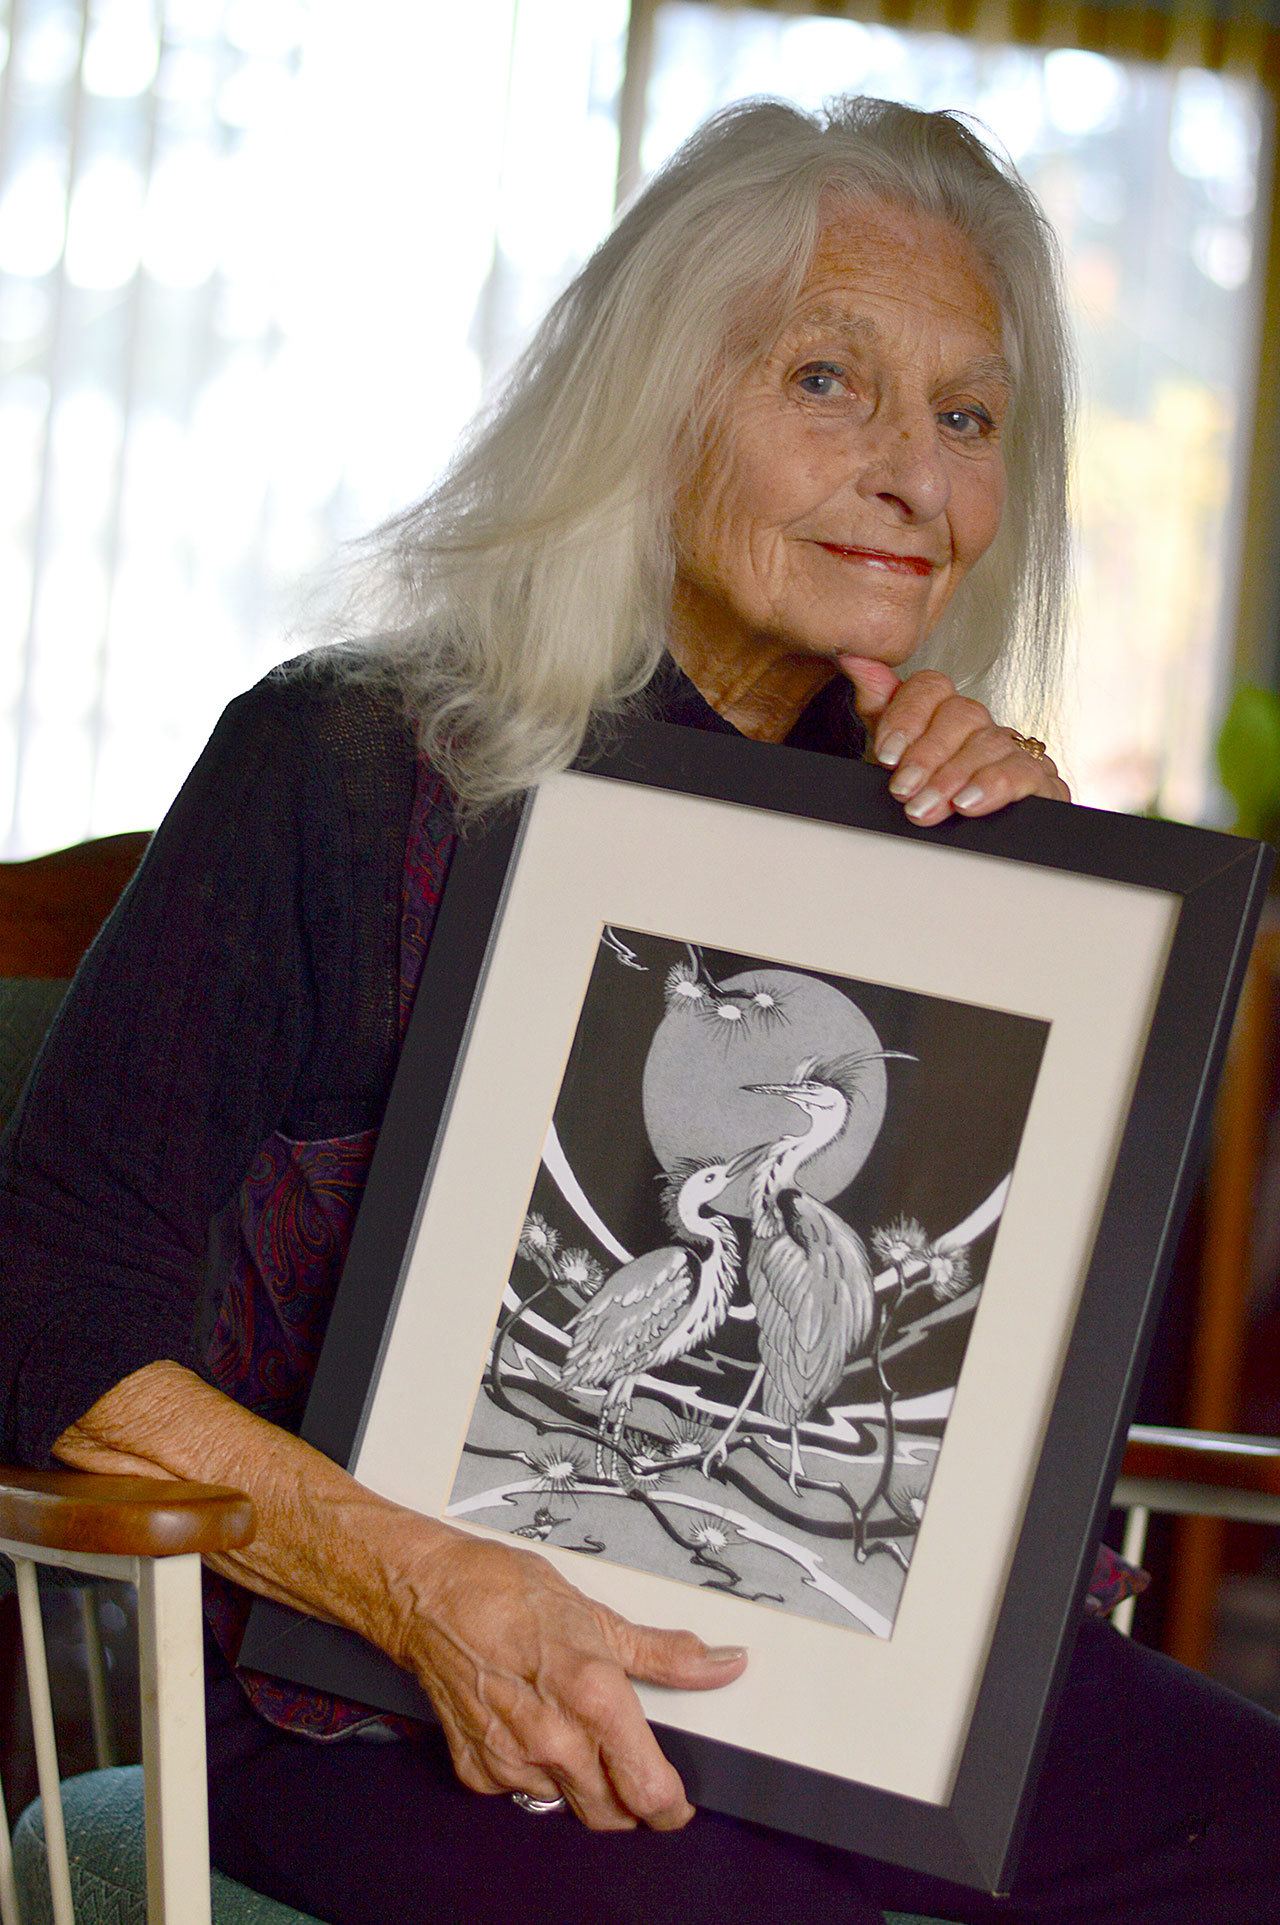 Caroline Culbertson sold the original to a Seattle art collector and kept a print for her living room. (Diane Urbani de la Paz/for Peninsula Daily News)